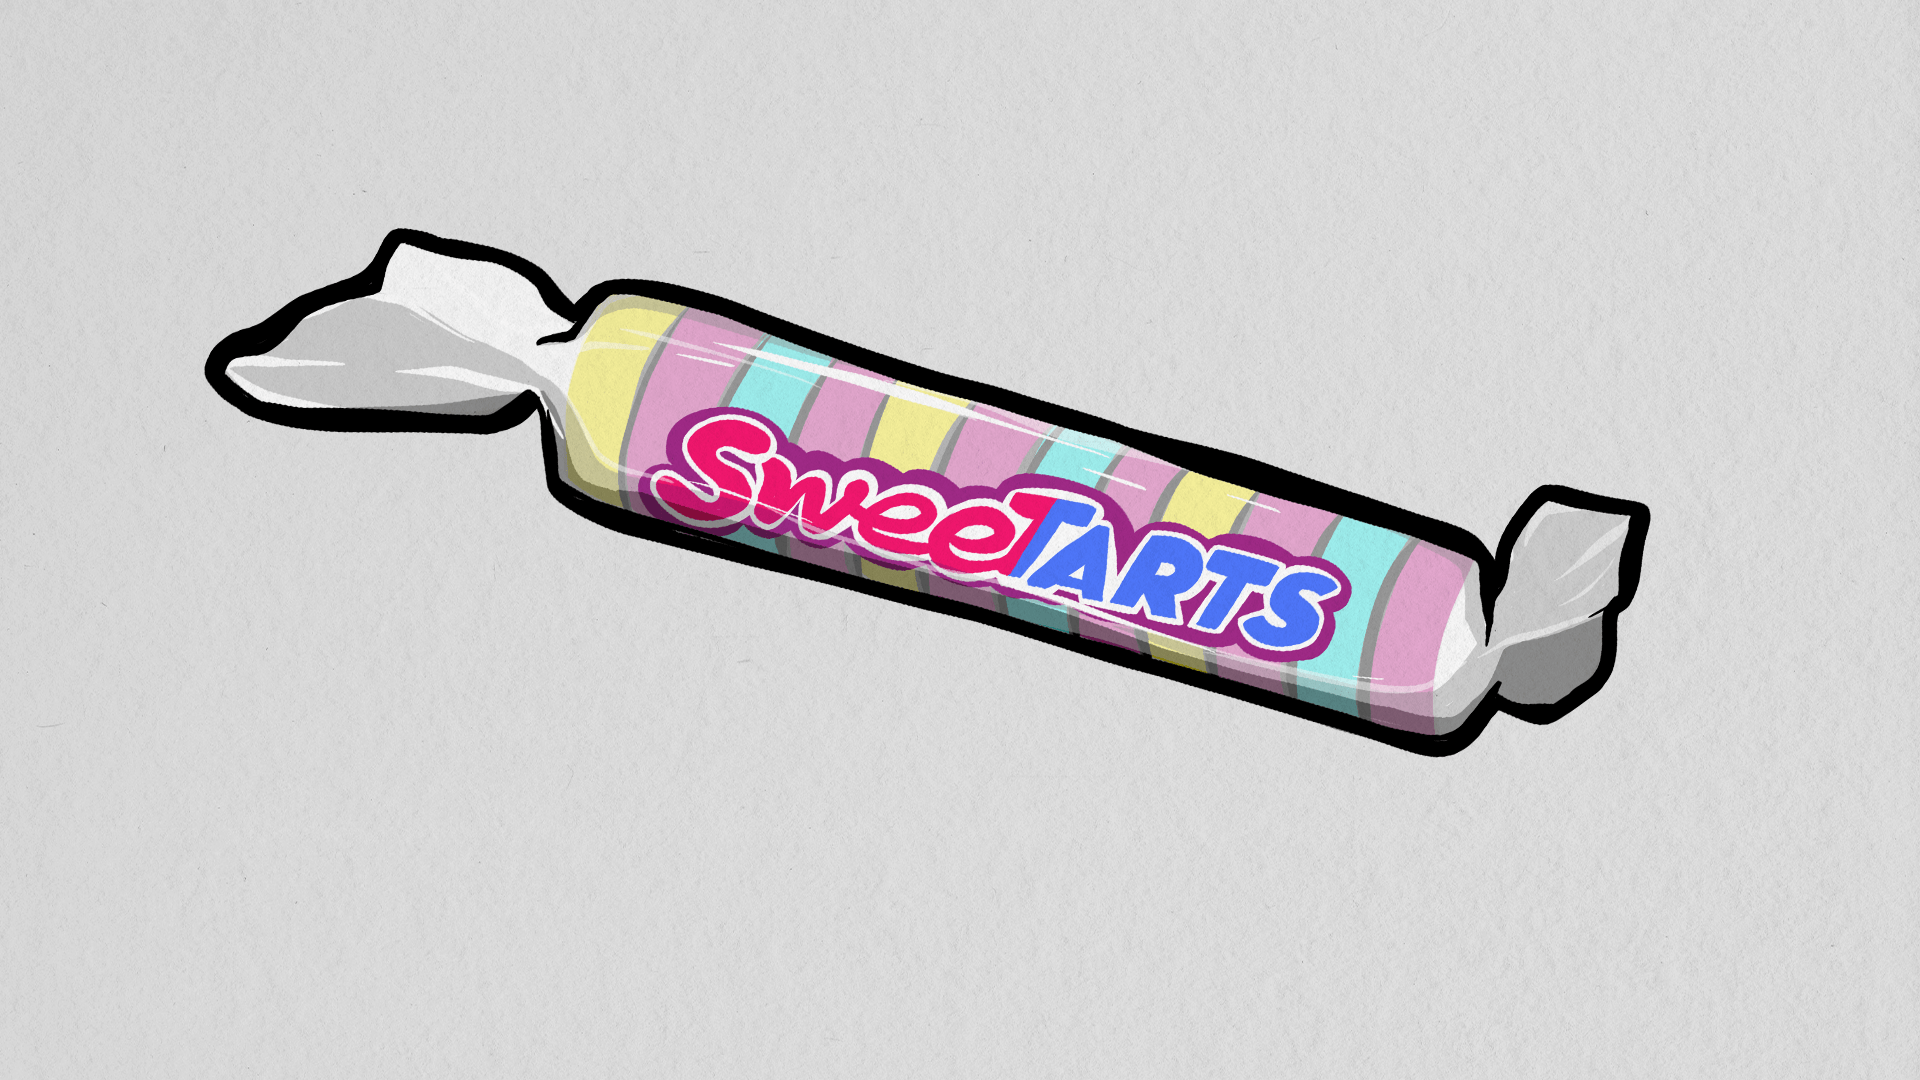 CandyisDandy_Drawings_0007_Sweet-tarts-min.png